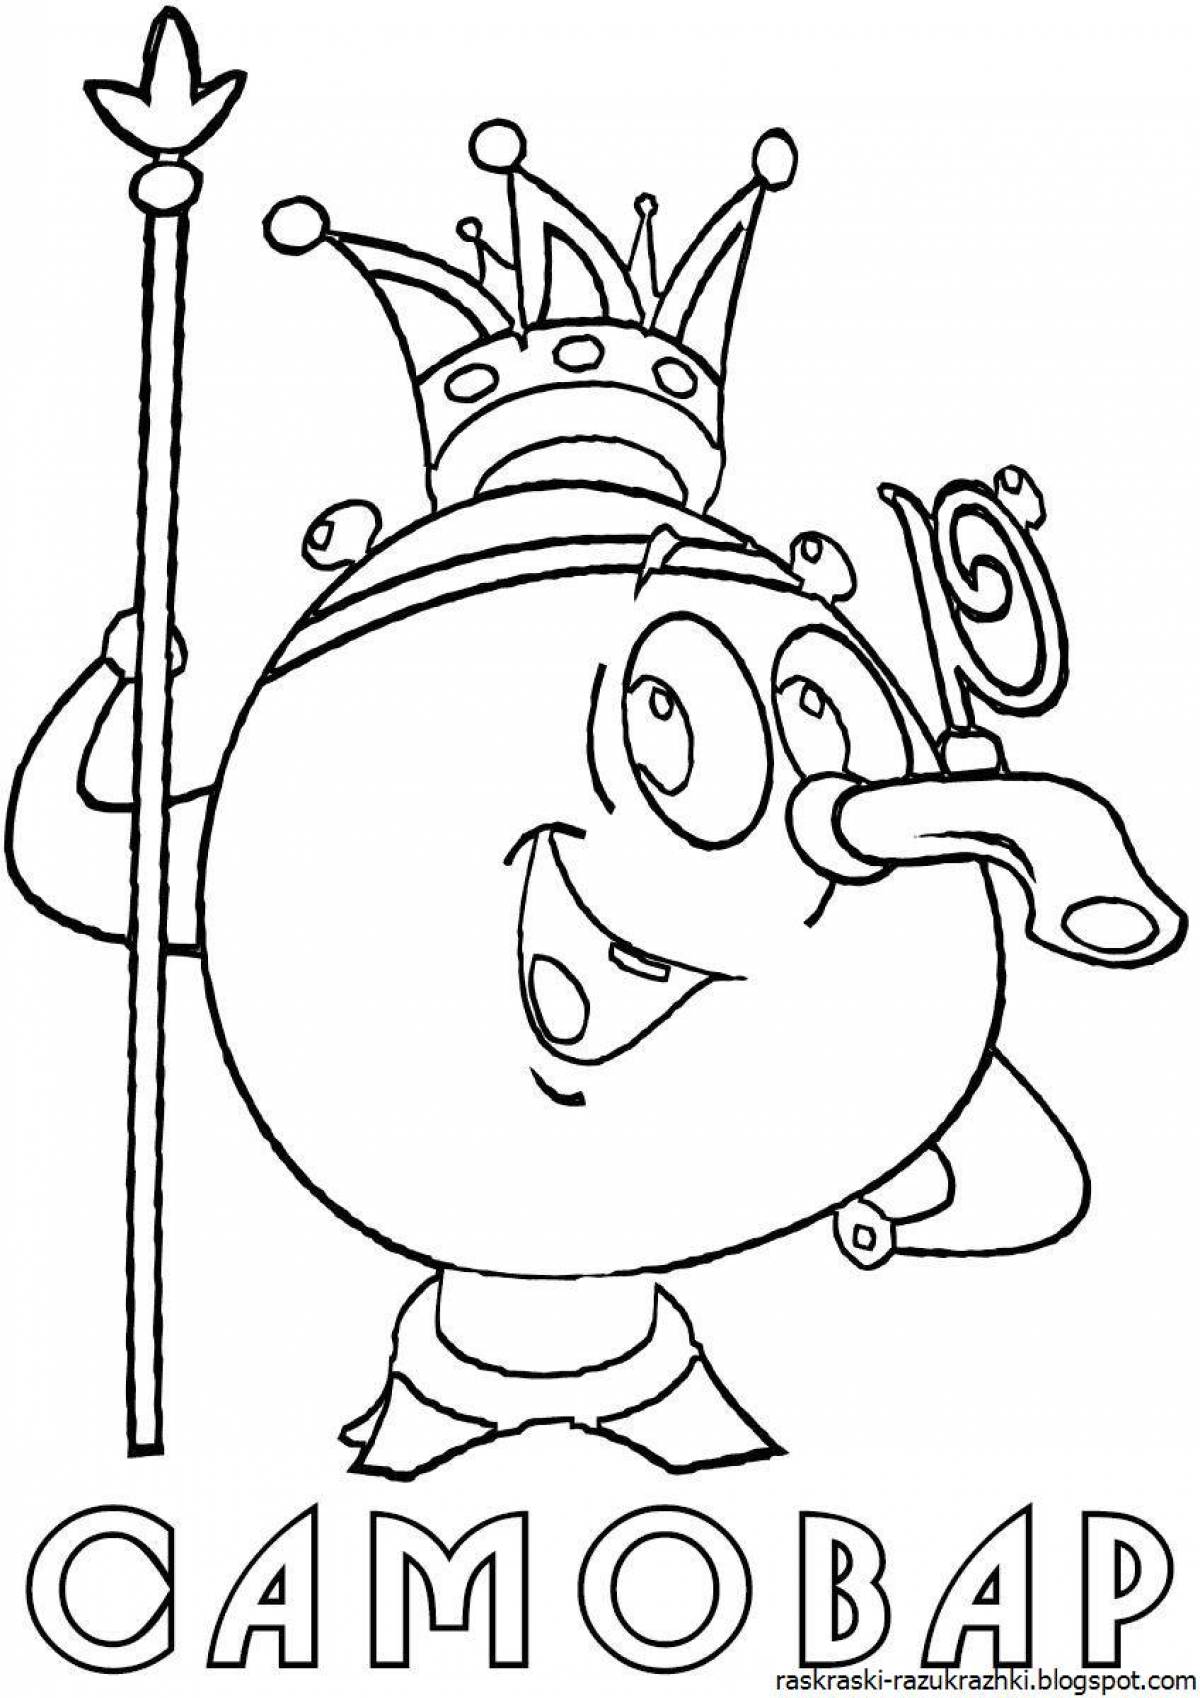 Inviting samovar coloring pages for children